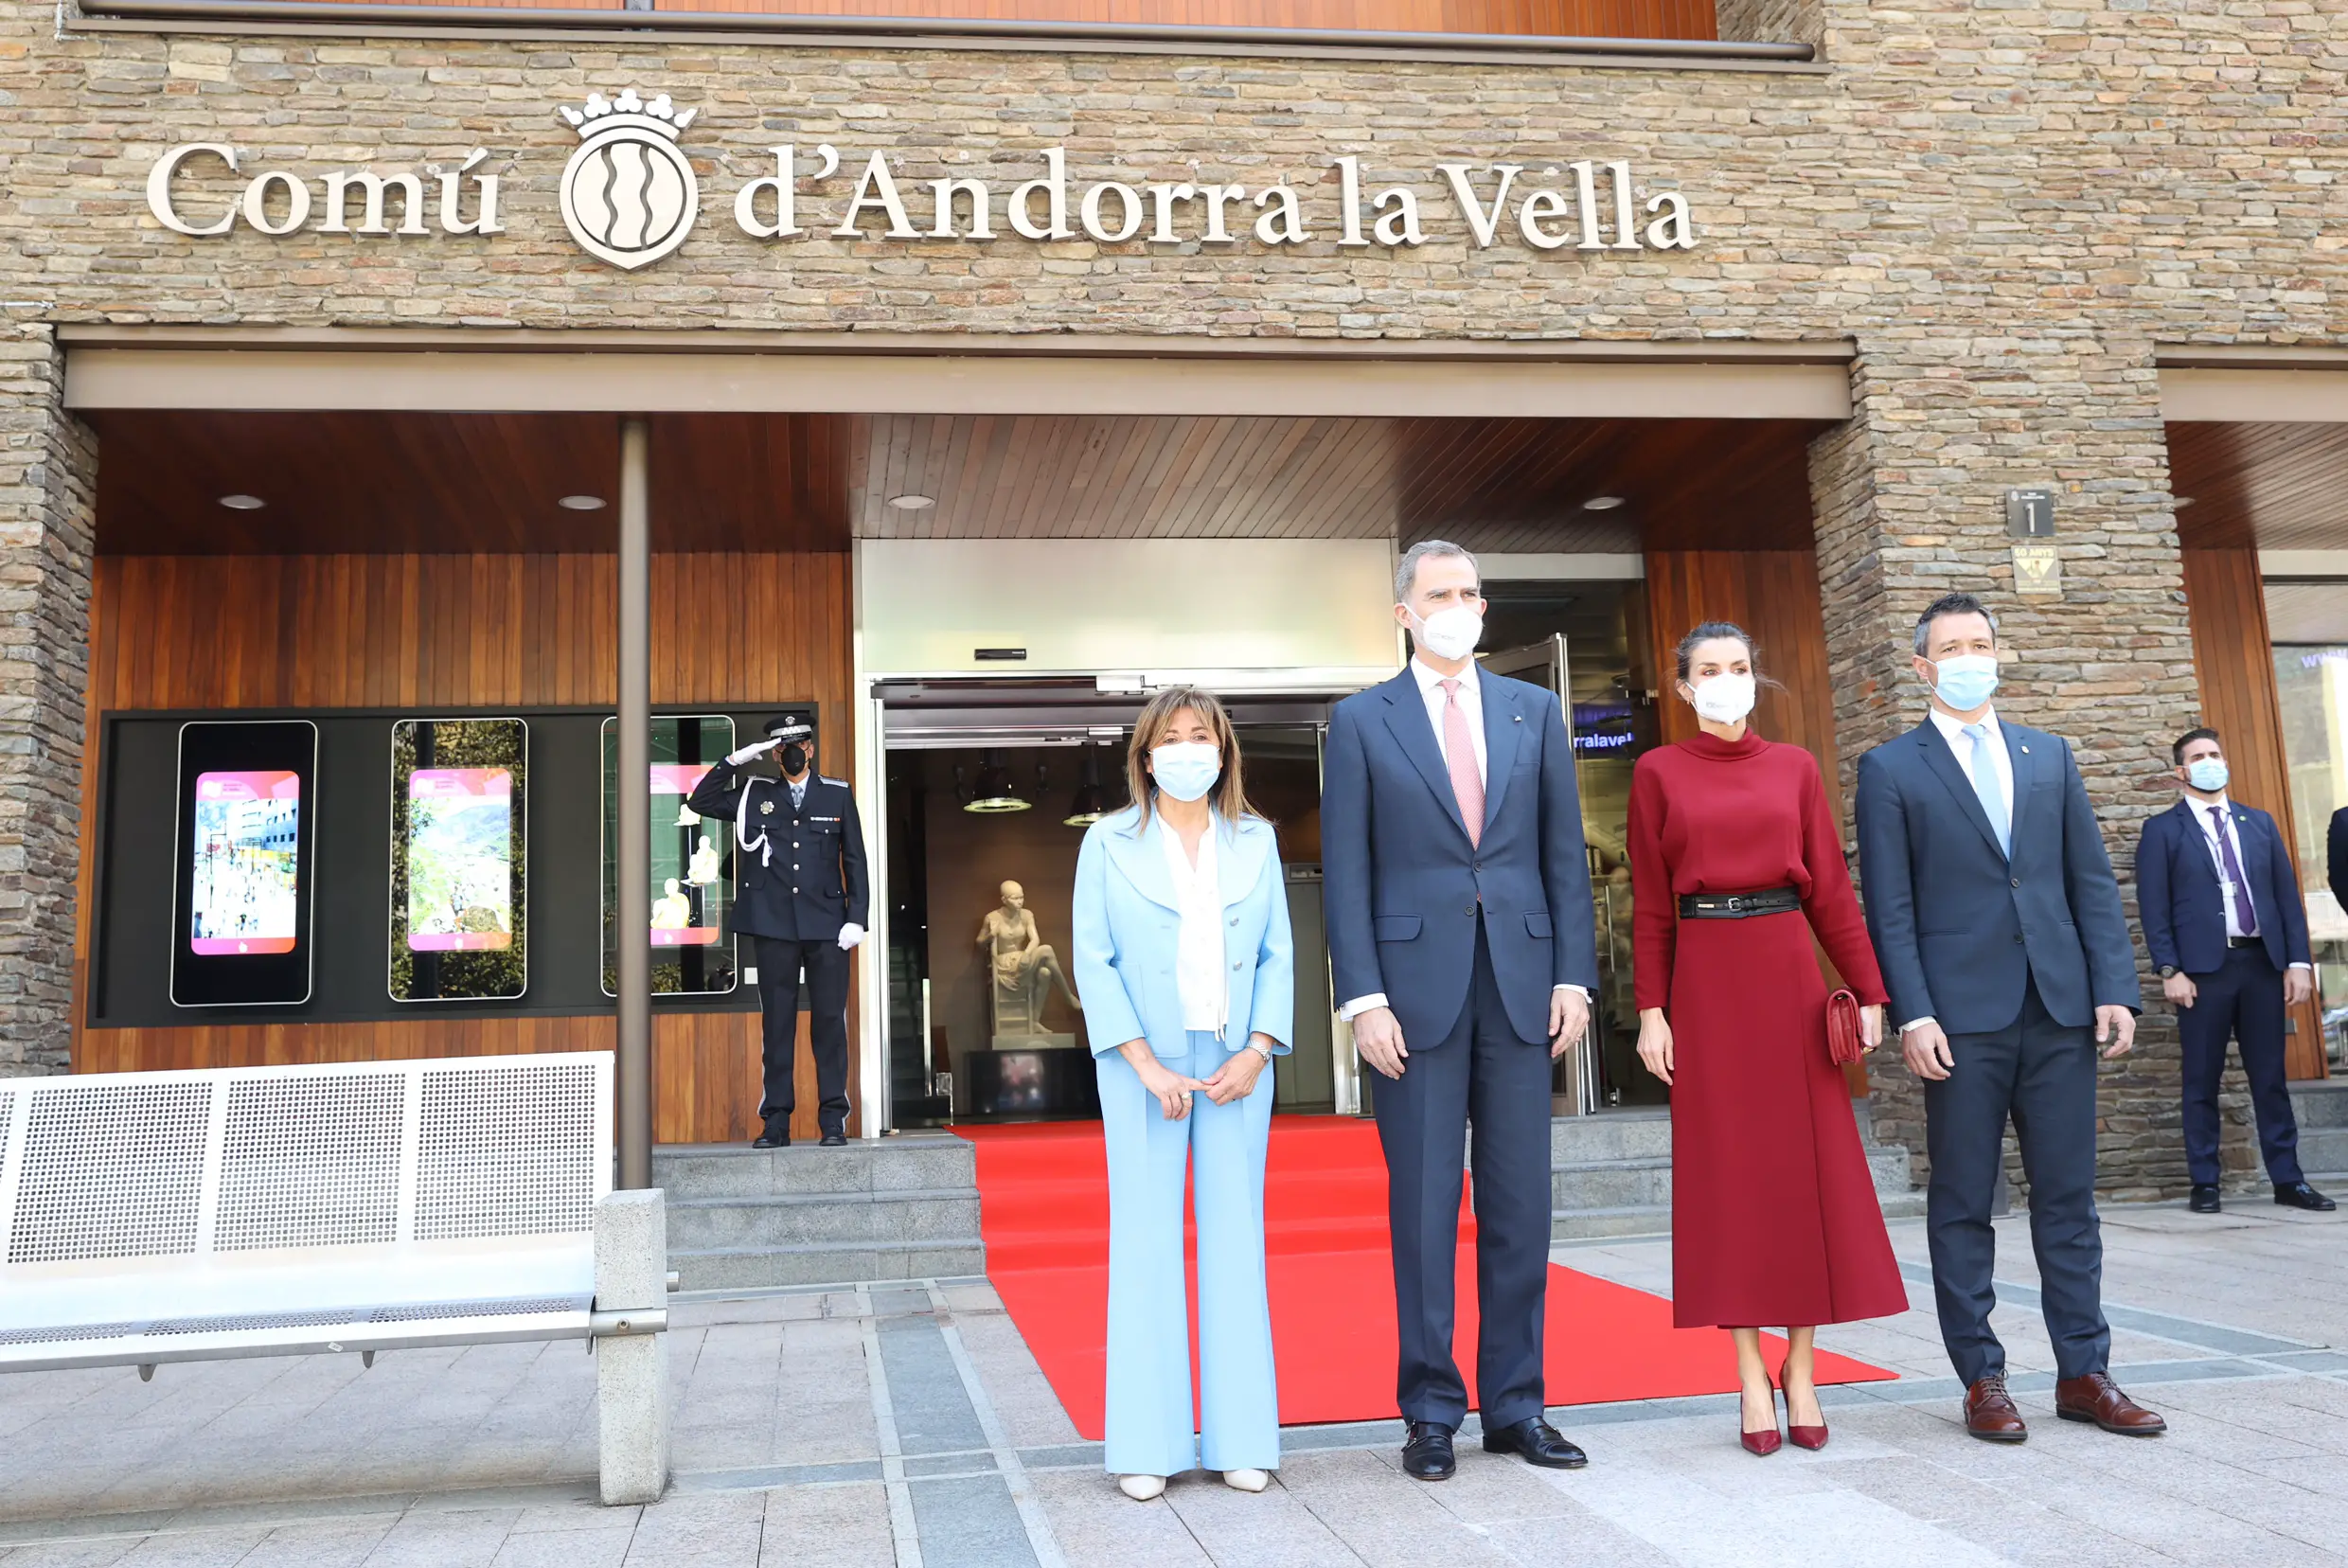 The second stop of the day was the the Community of Andorra la Vella